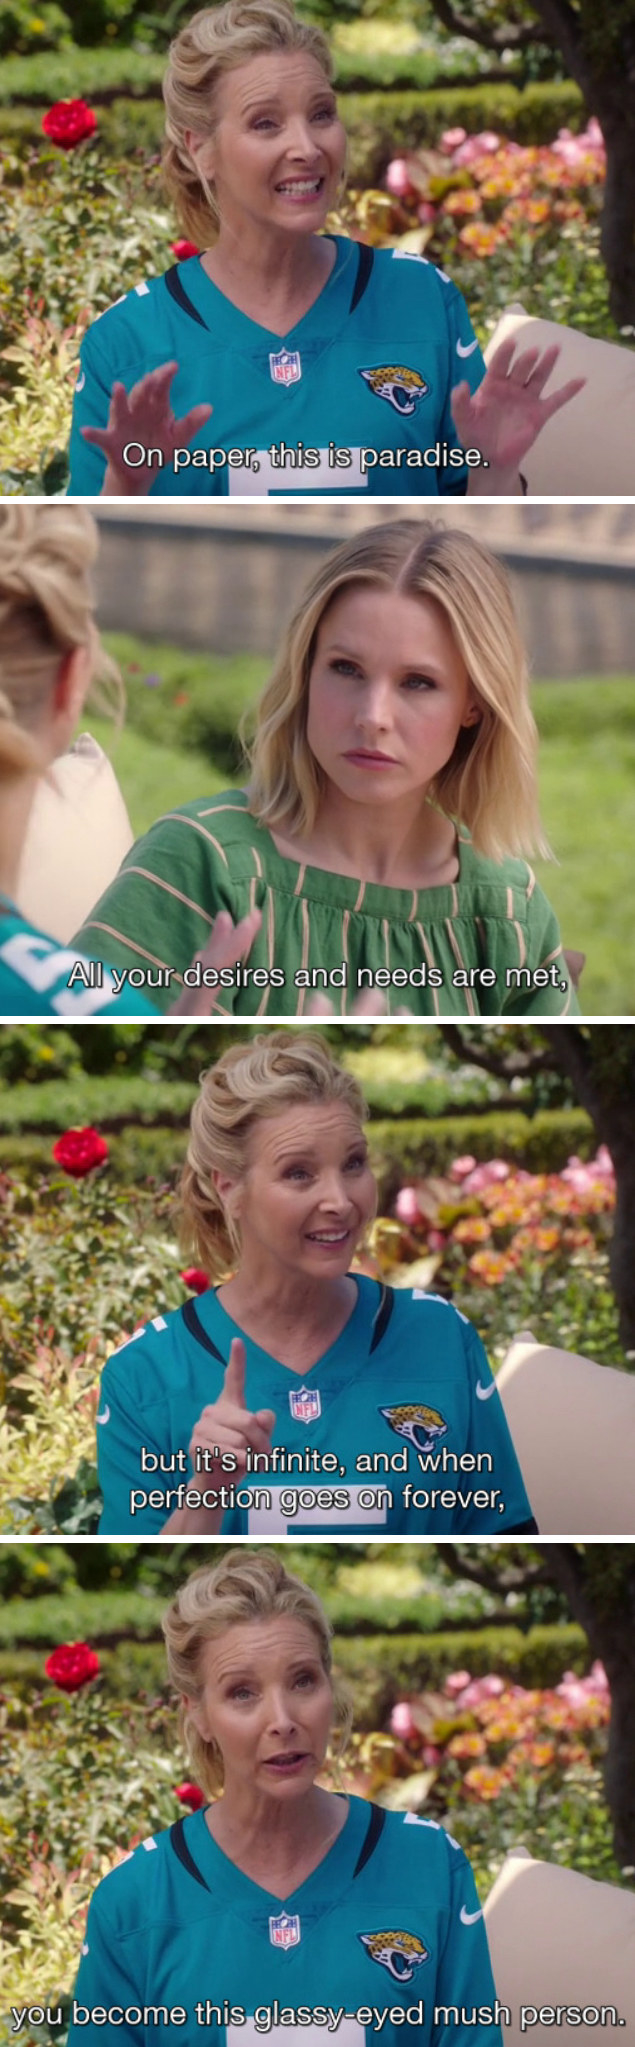 Patty telling Eleanor and Chidi the Good Place is essentially a hoax because &quot;when perfection goes on forever, you become this glassy-eyed mush person.&quot;